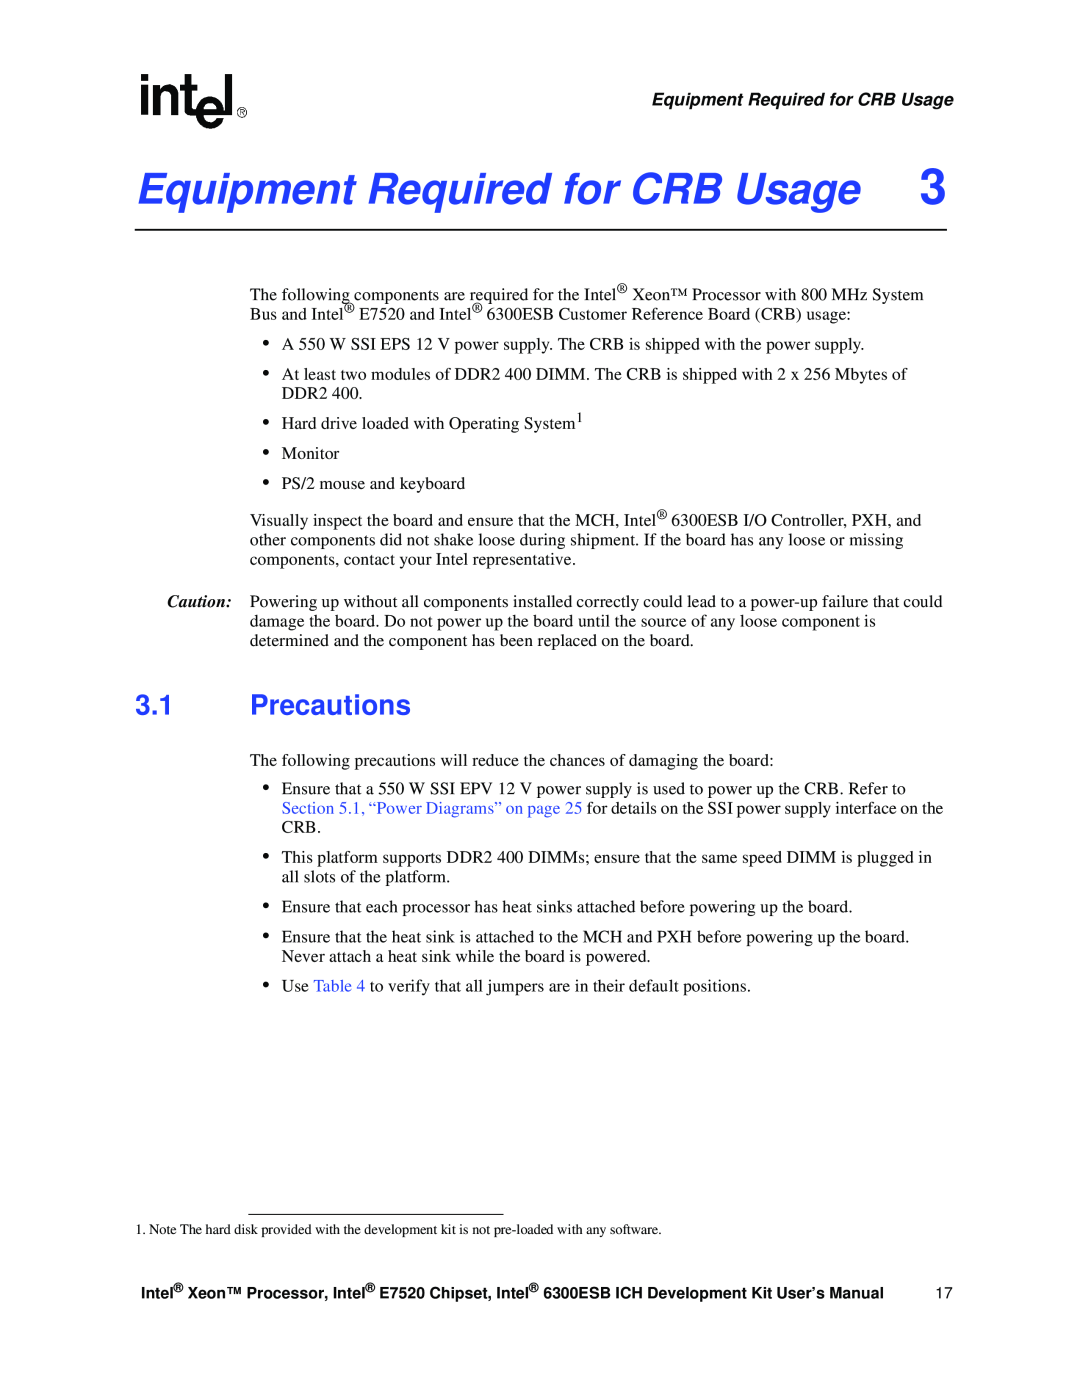 Intel 6300ESB ICH, Xeon user manual Equipment Required for CRB Usage, Precautions 